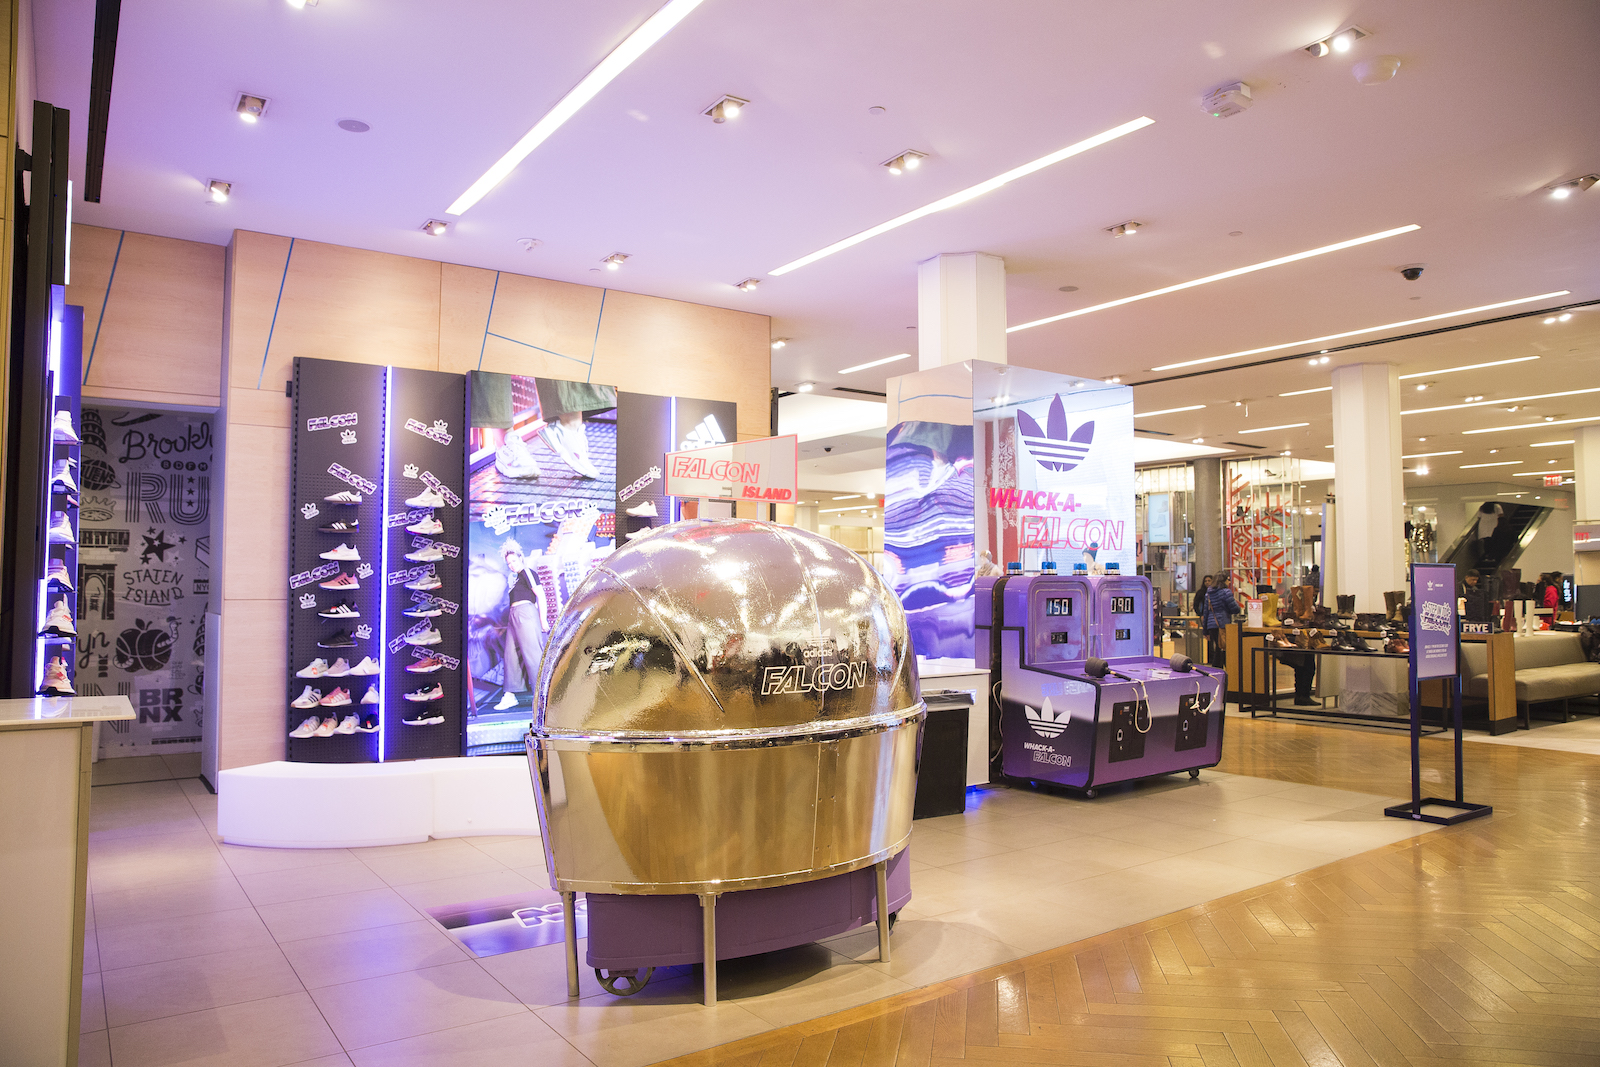 Another view of a retail space with a shoe wall with Falcon stickers, sneakers and  large campaign imagery, a round mirrored booth photo op, and two Whack-a-Falcon arcade games.